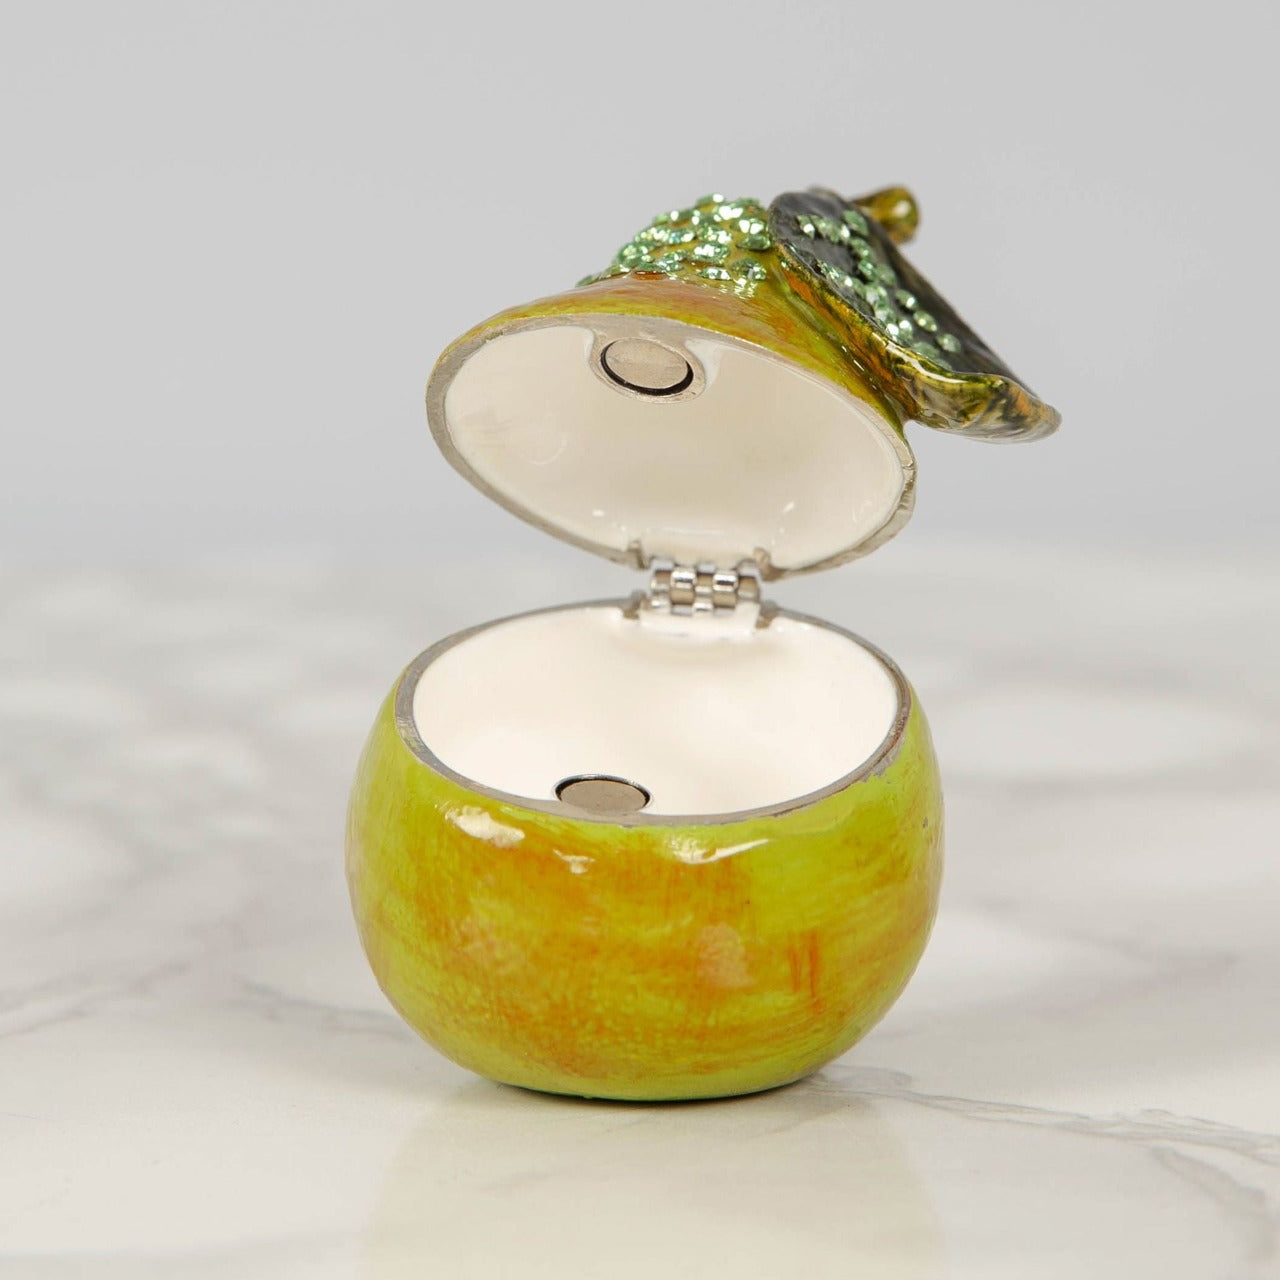 Treasured Trinket - Pear  A beautiful die-cast metal pear trinket box with crystal embellishments. From Treasured Trinkets by STRATTON® - hand painted, collectable trinkets to be treasured for a lifetime.